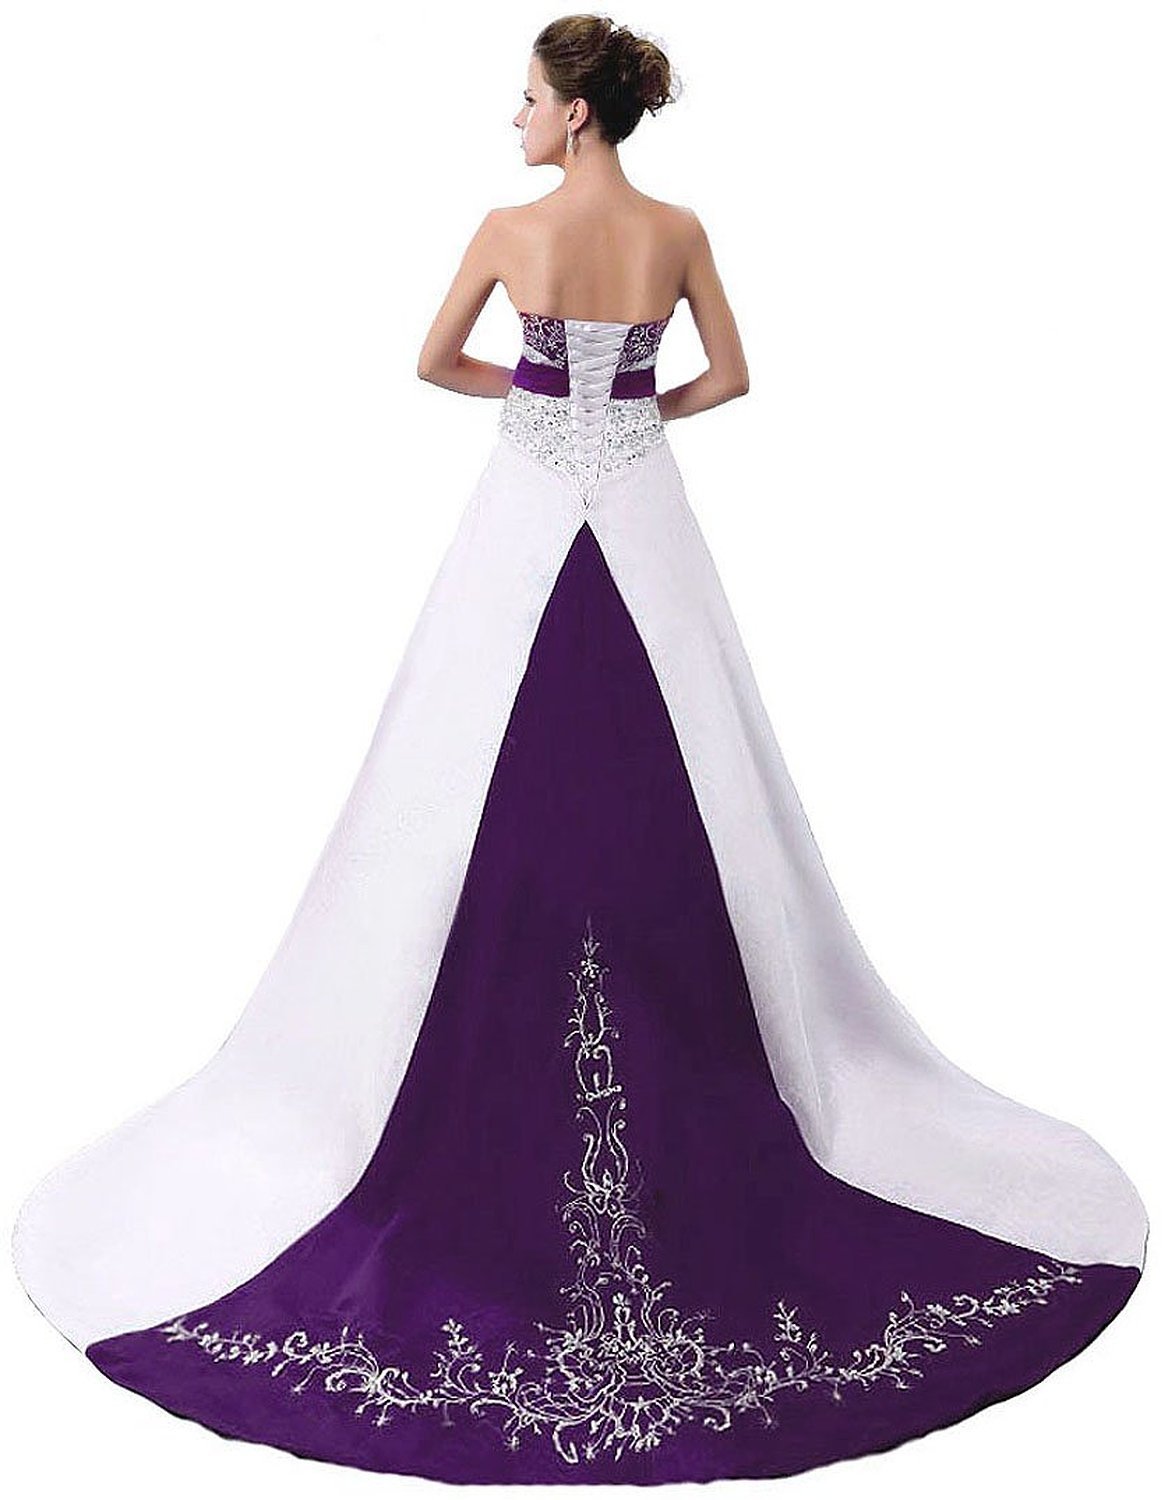 Ball Gown Purple and White Wedding Dresses Wedding Gown Bridal Dress